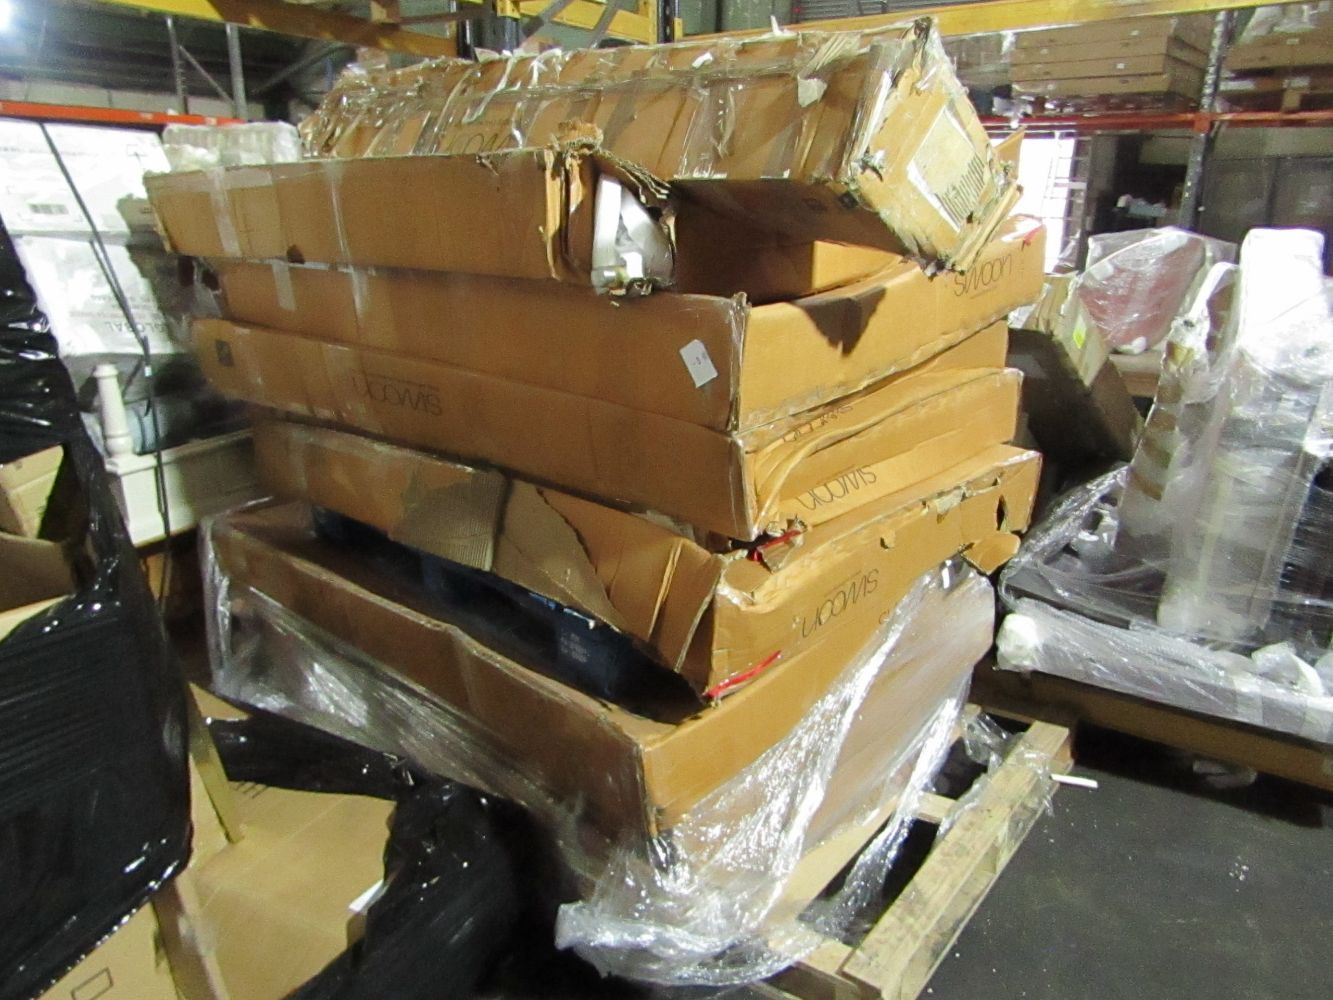 Pallets of BER Furniture from Swoon, Oak Furniture land and more